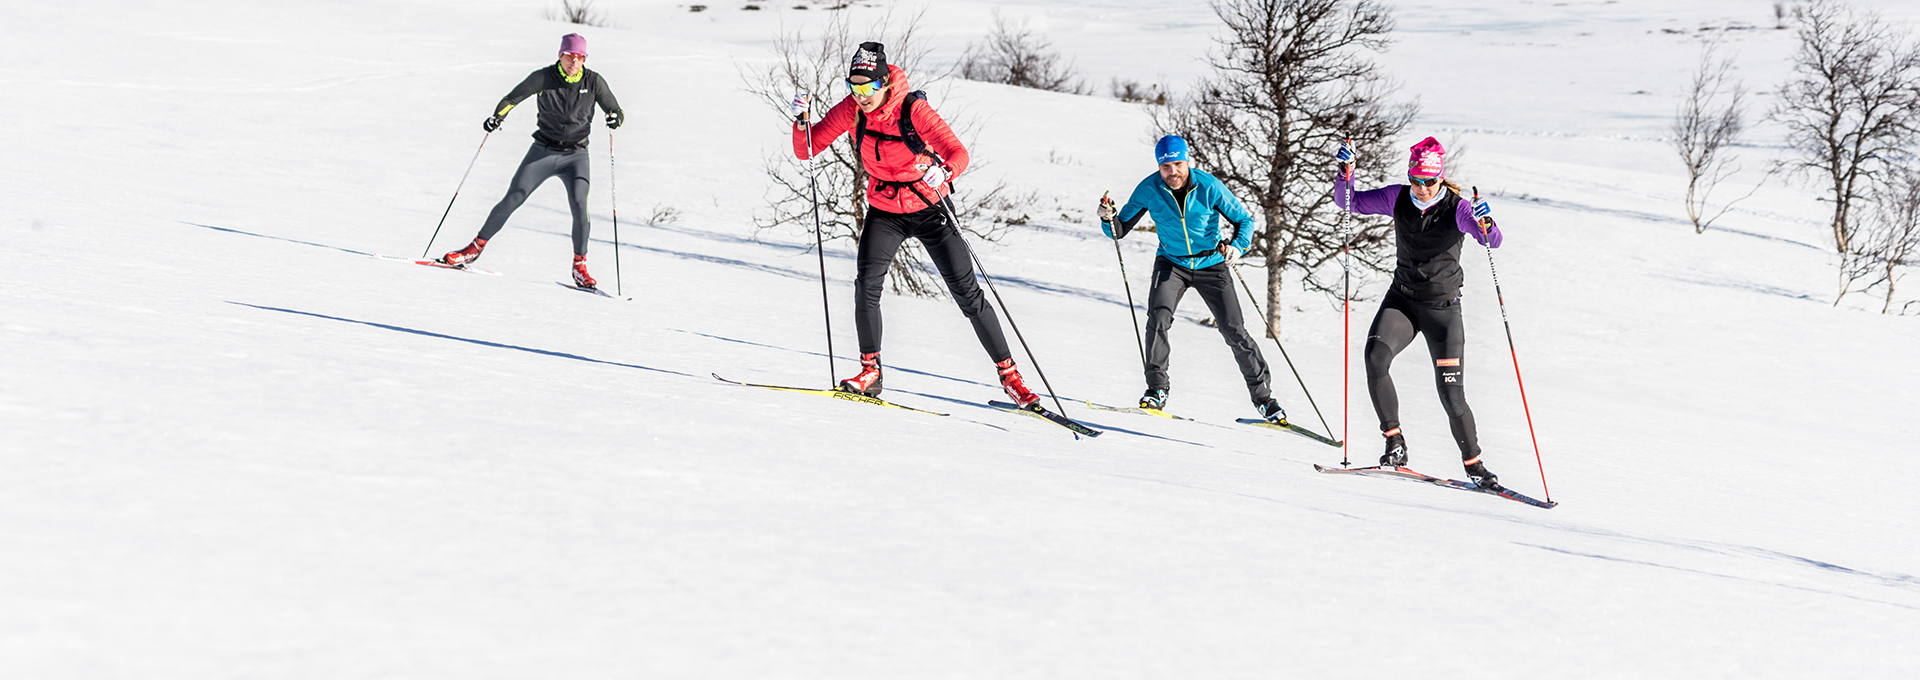 two cross-country skiers in the tracks